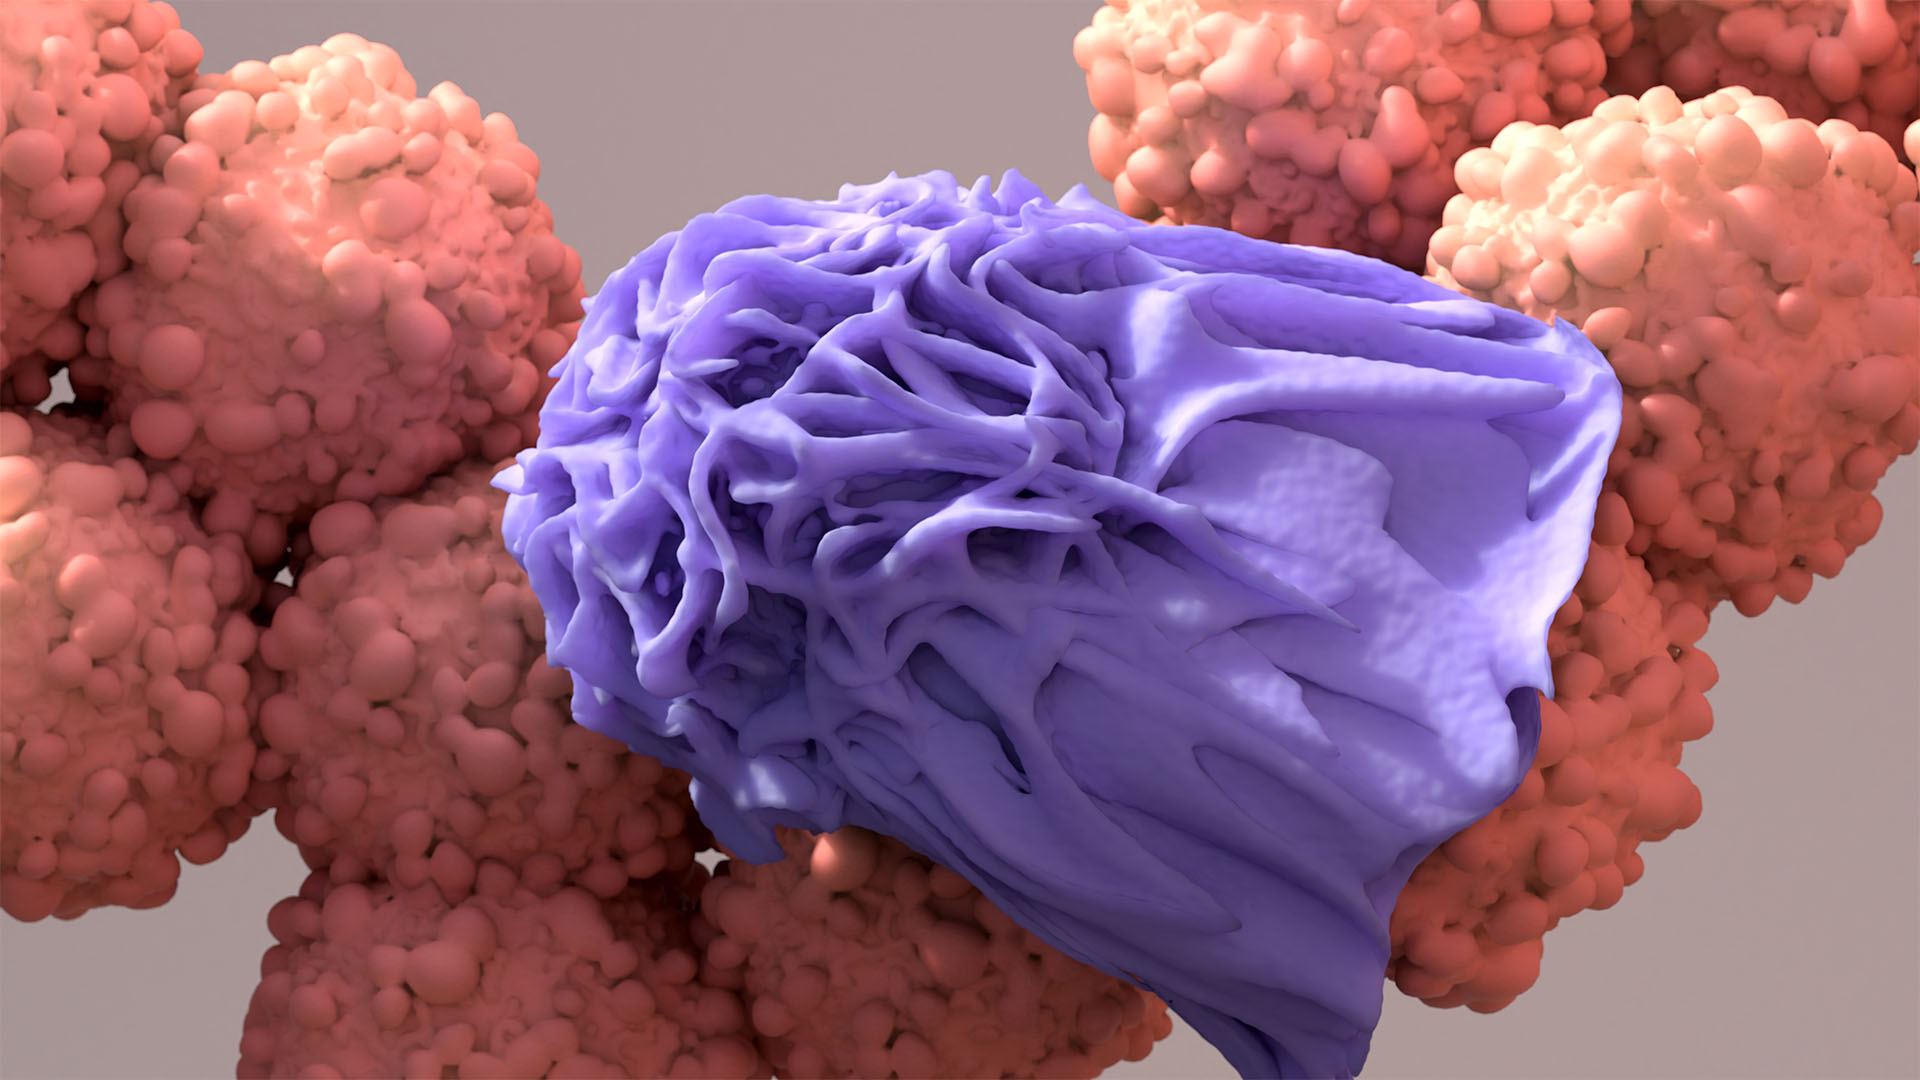 Apoptosis implication in cancer